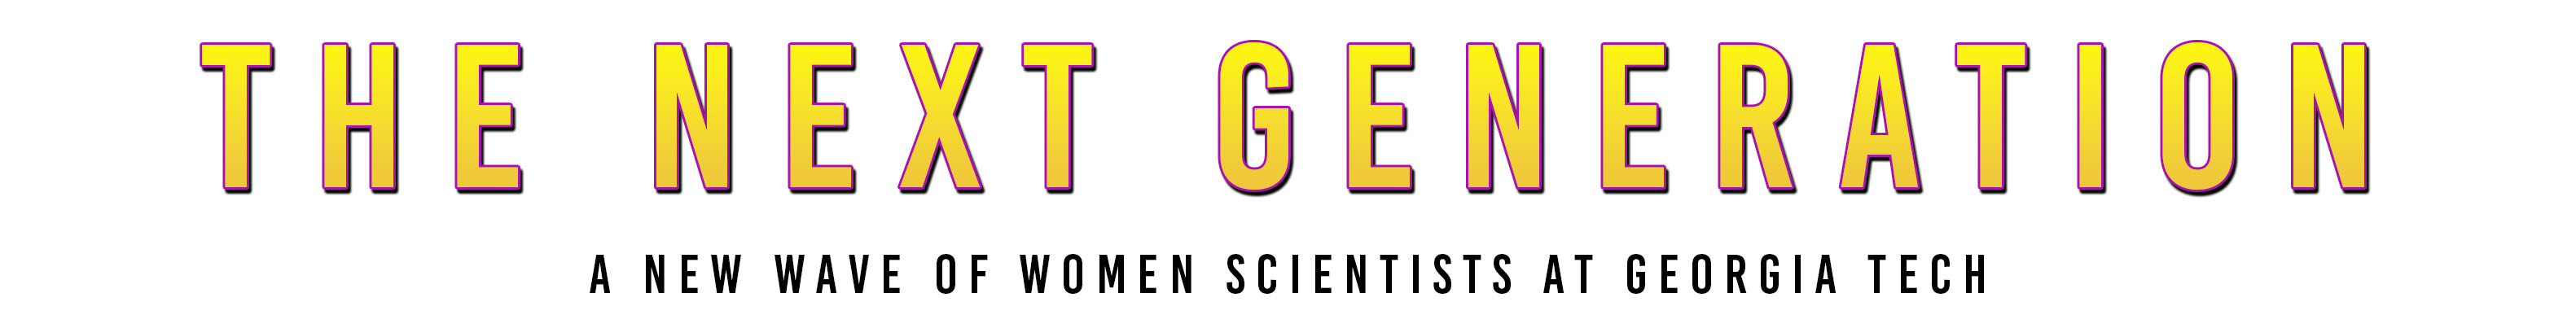 THE NEXT GENERATION text in yellow and orange gradient with purple outline and drop shadow  and below in black is A NEW WAVE OF WOMEN SCIENTISTS AT GEORGIA TECH.